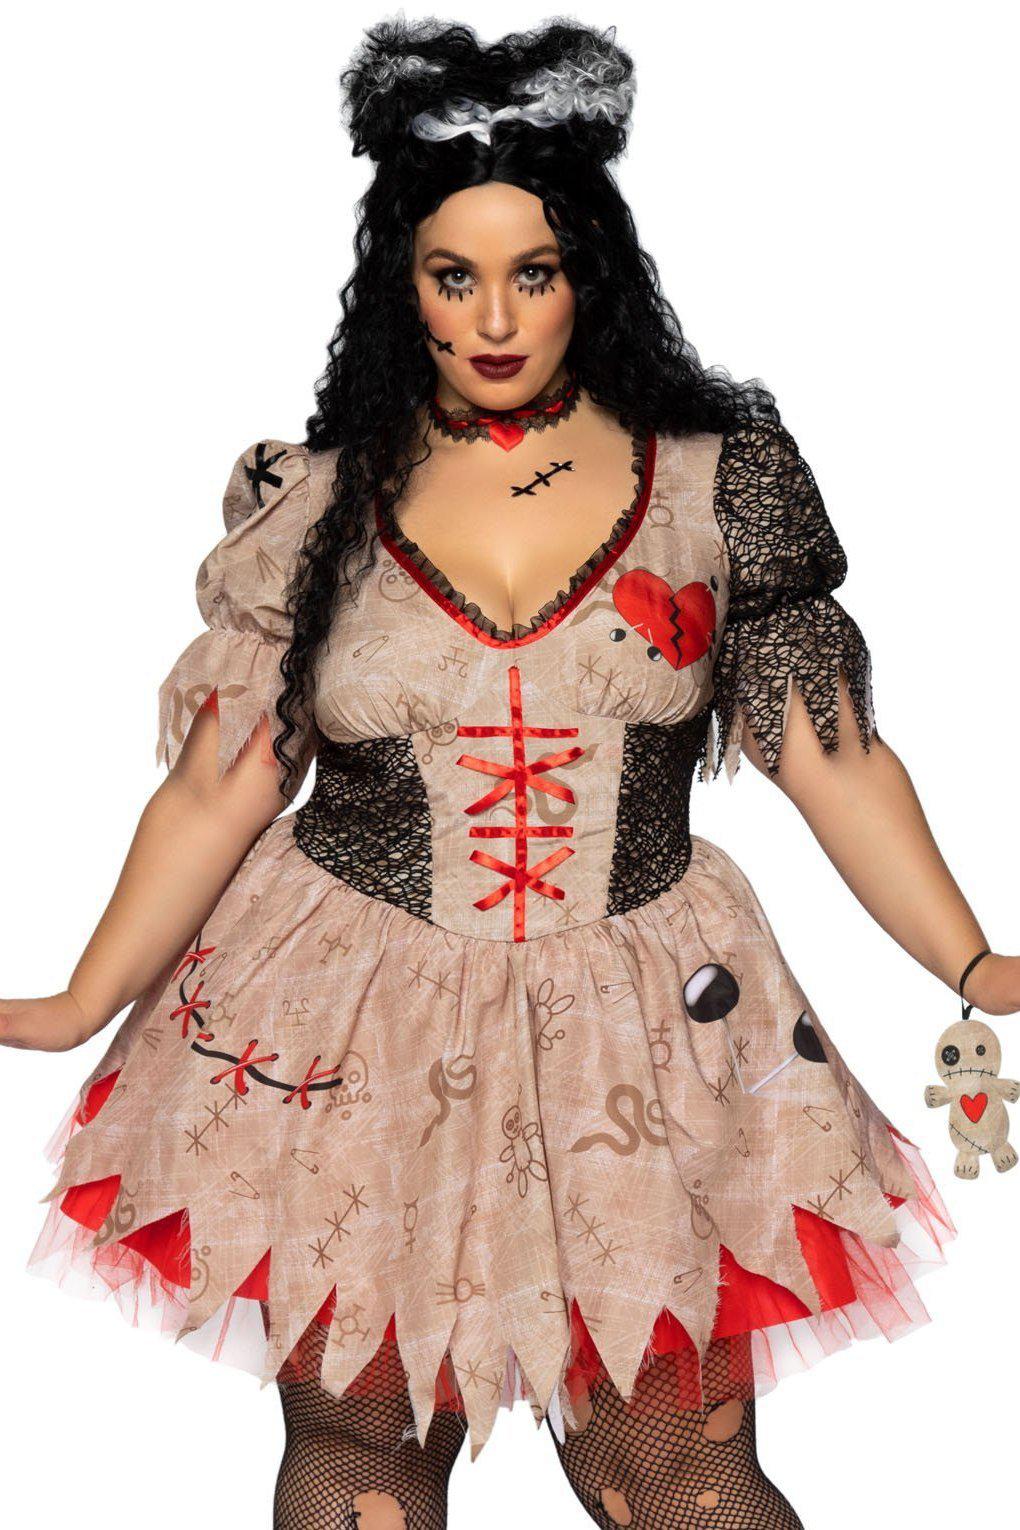 Plus Size Deadly Voodoo Doll Costume-Other Costumes-Leg Avenue-Multi-1/2XL-SEXYSHOES.COM